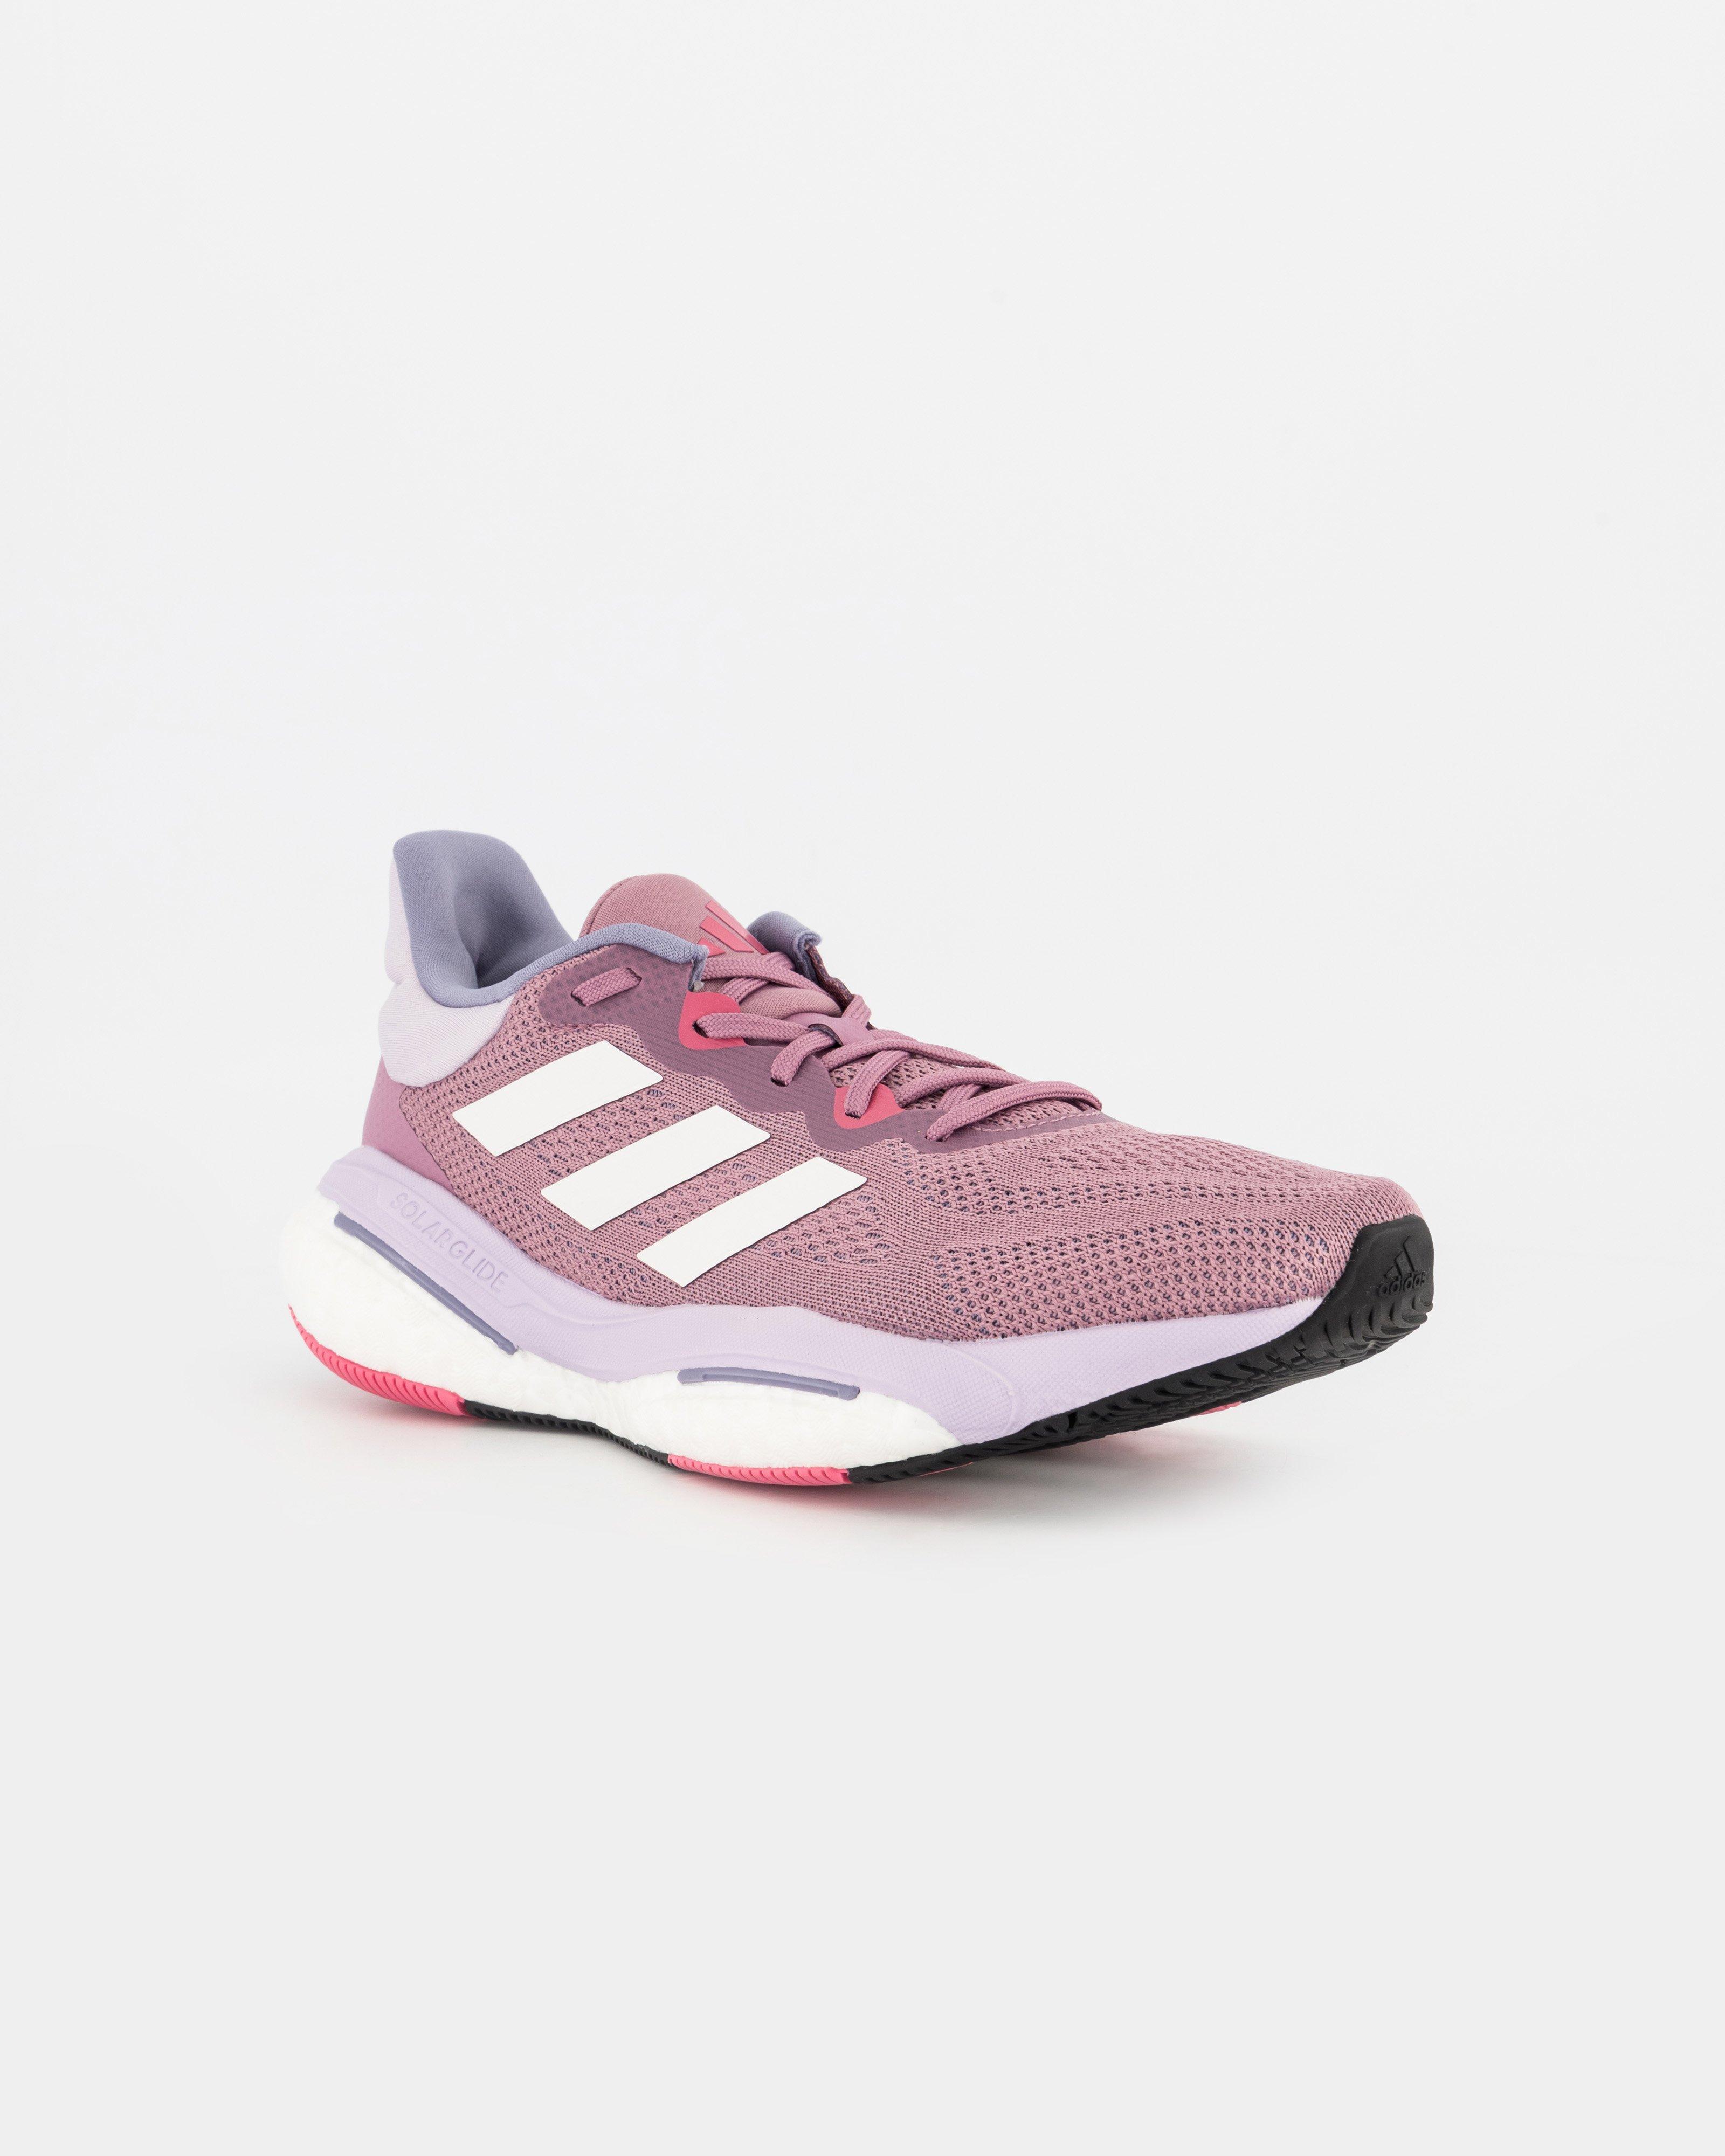 Adidas Women’s SOLARGLIDE 6 Road Running Shoes -  Pink